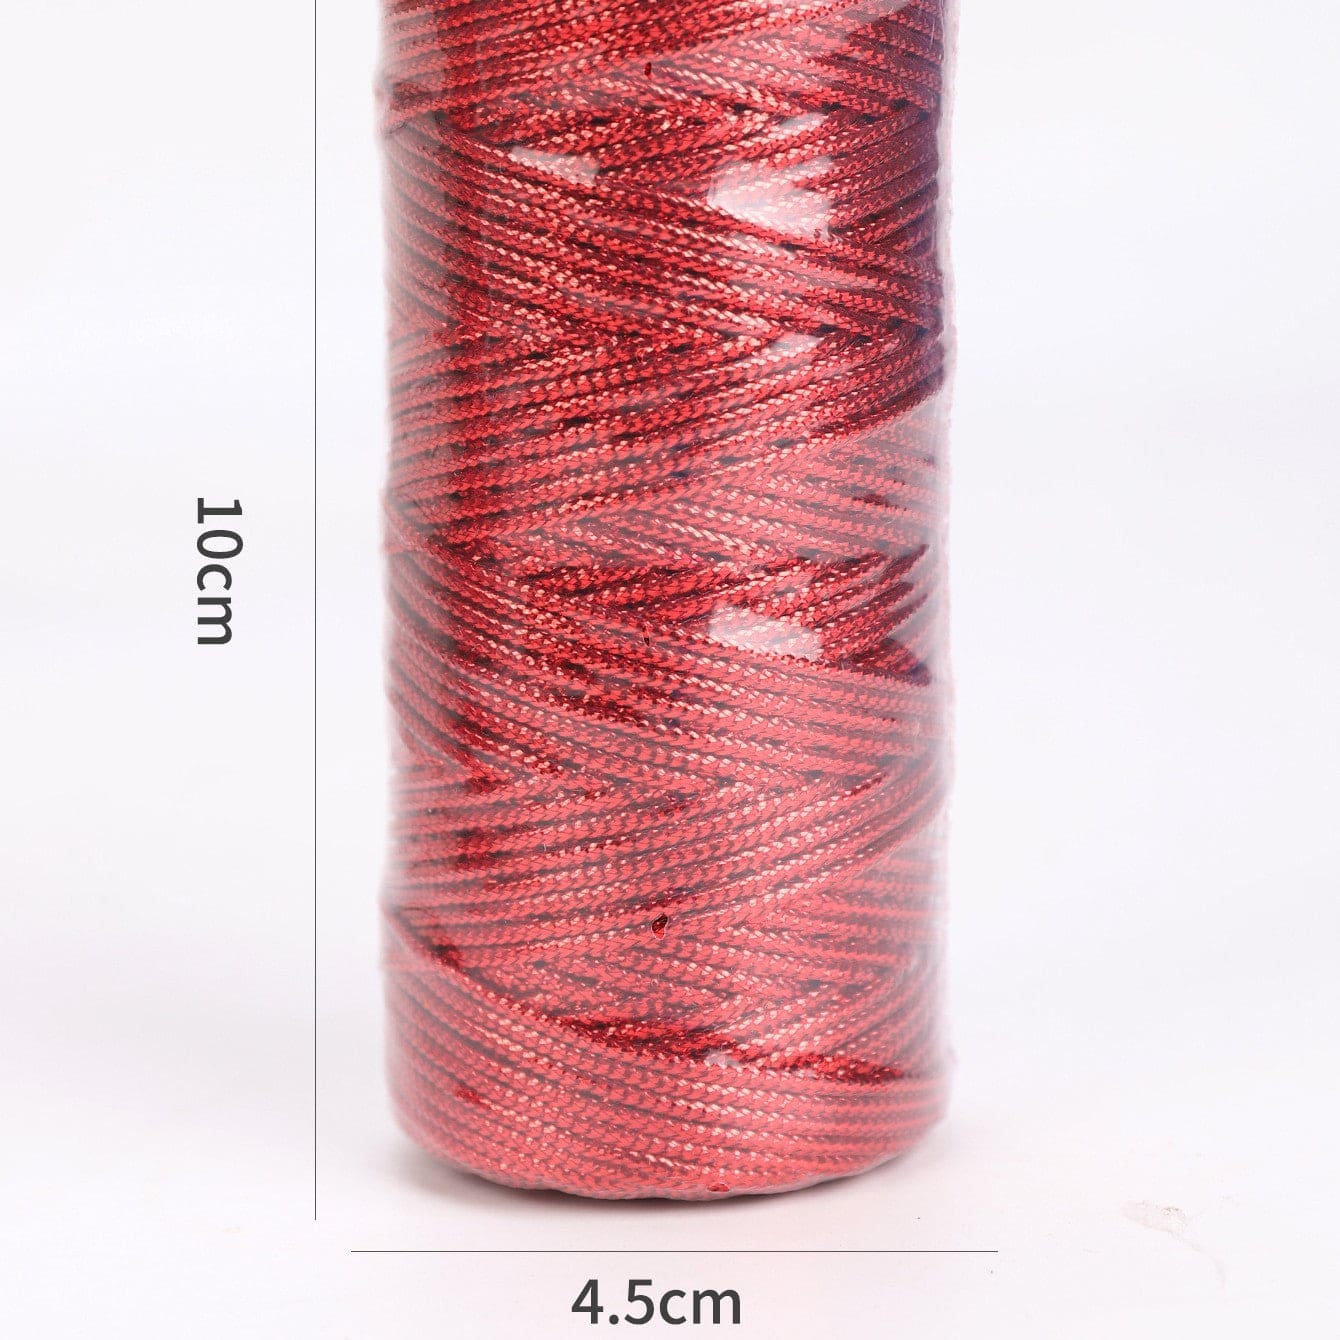 16 Strands Flat Hollow Gold Wire Non-stretch Gift Wrapping Wire